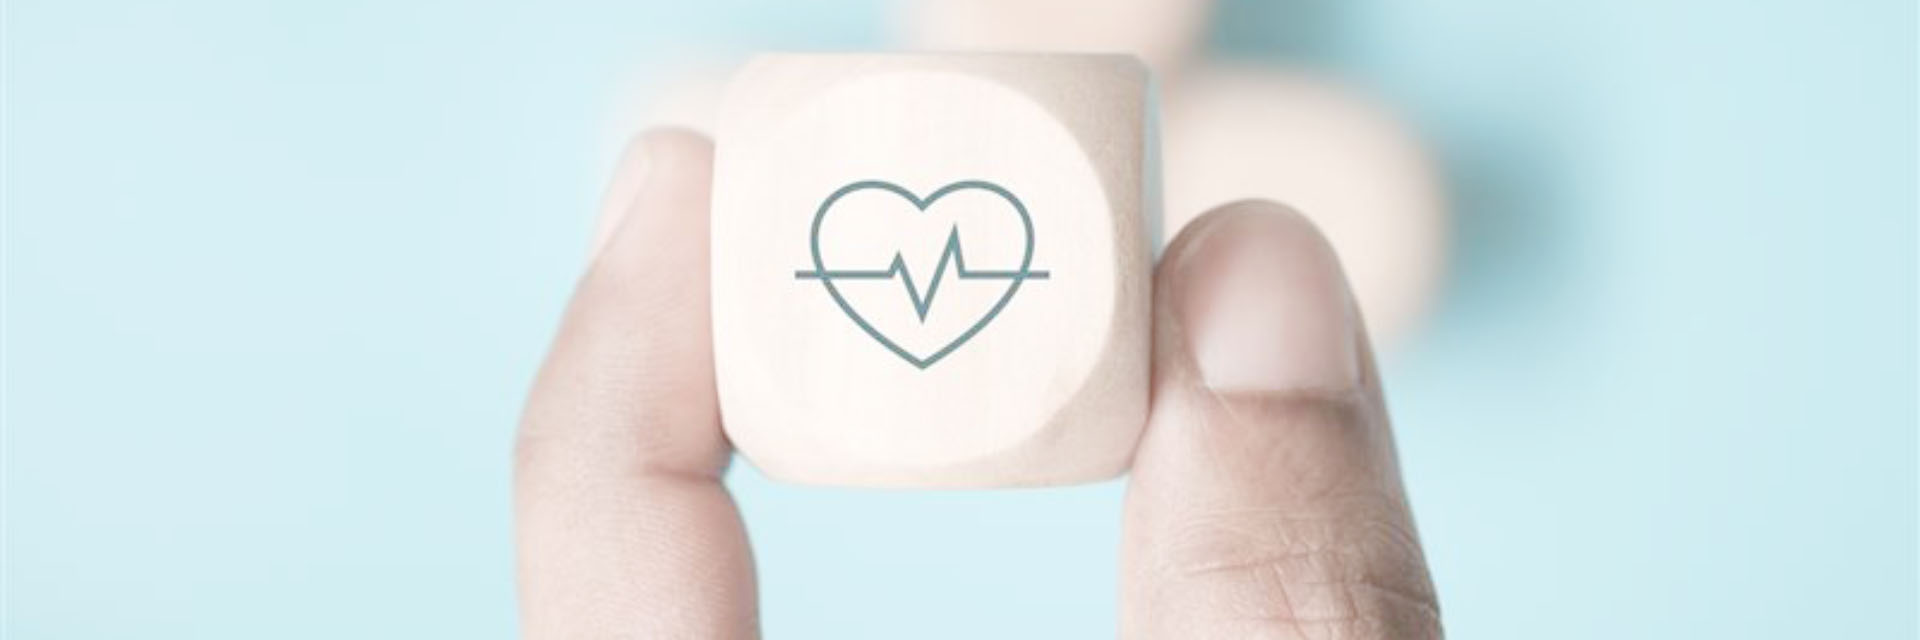 Photo of a finger and thumb holding up a wooden die with a heart rate symbol on it